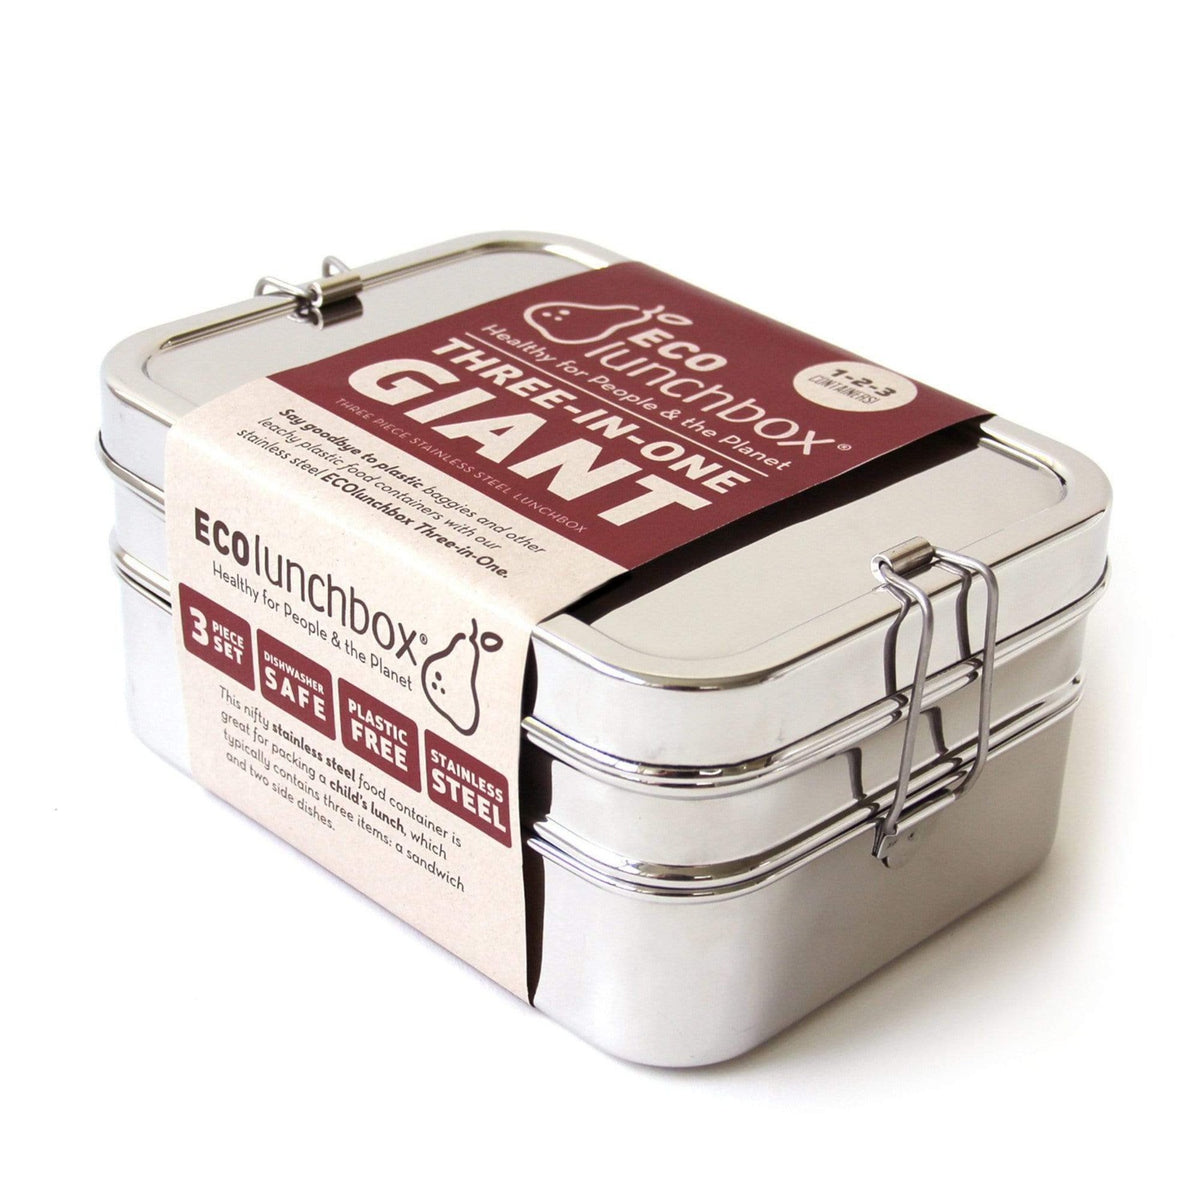 Classic Metal Lunch Box, 10 oz, Stainless Steel